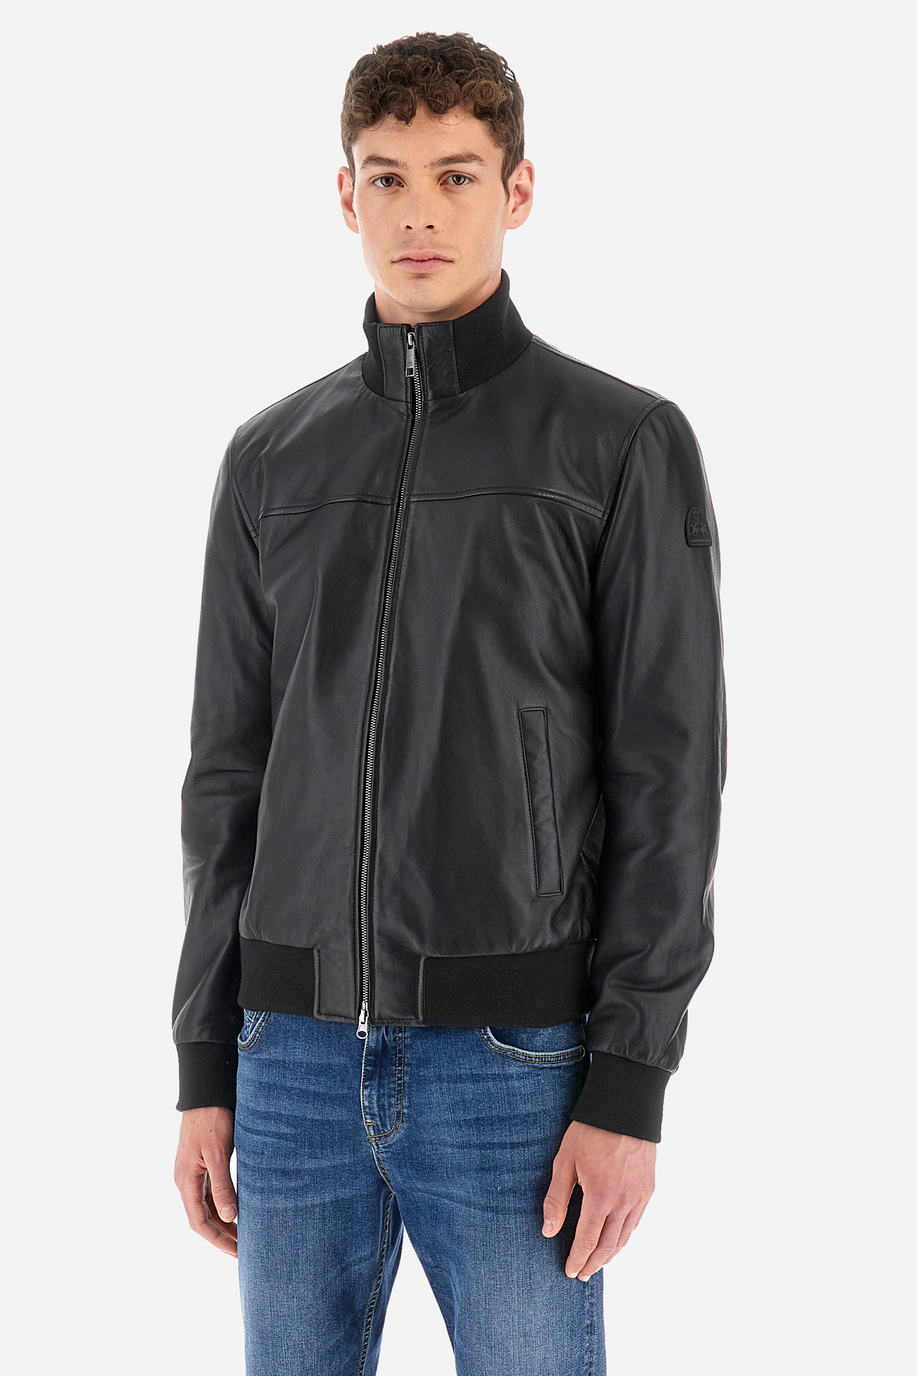 Man regular fit jacket - Wentworth - Outerwear and Jackets | La Martina - Official Online Shop